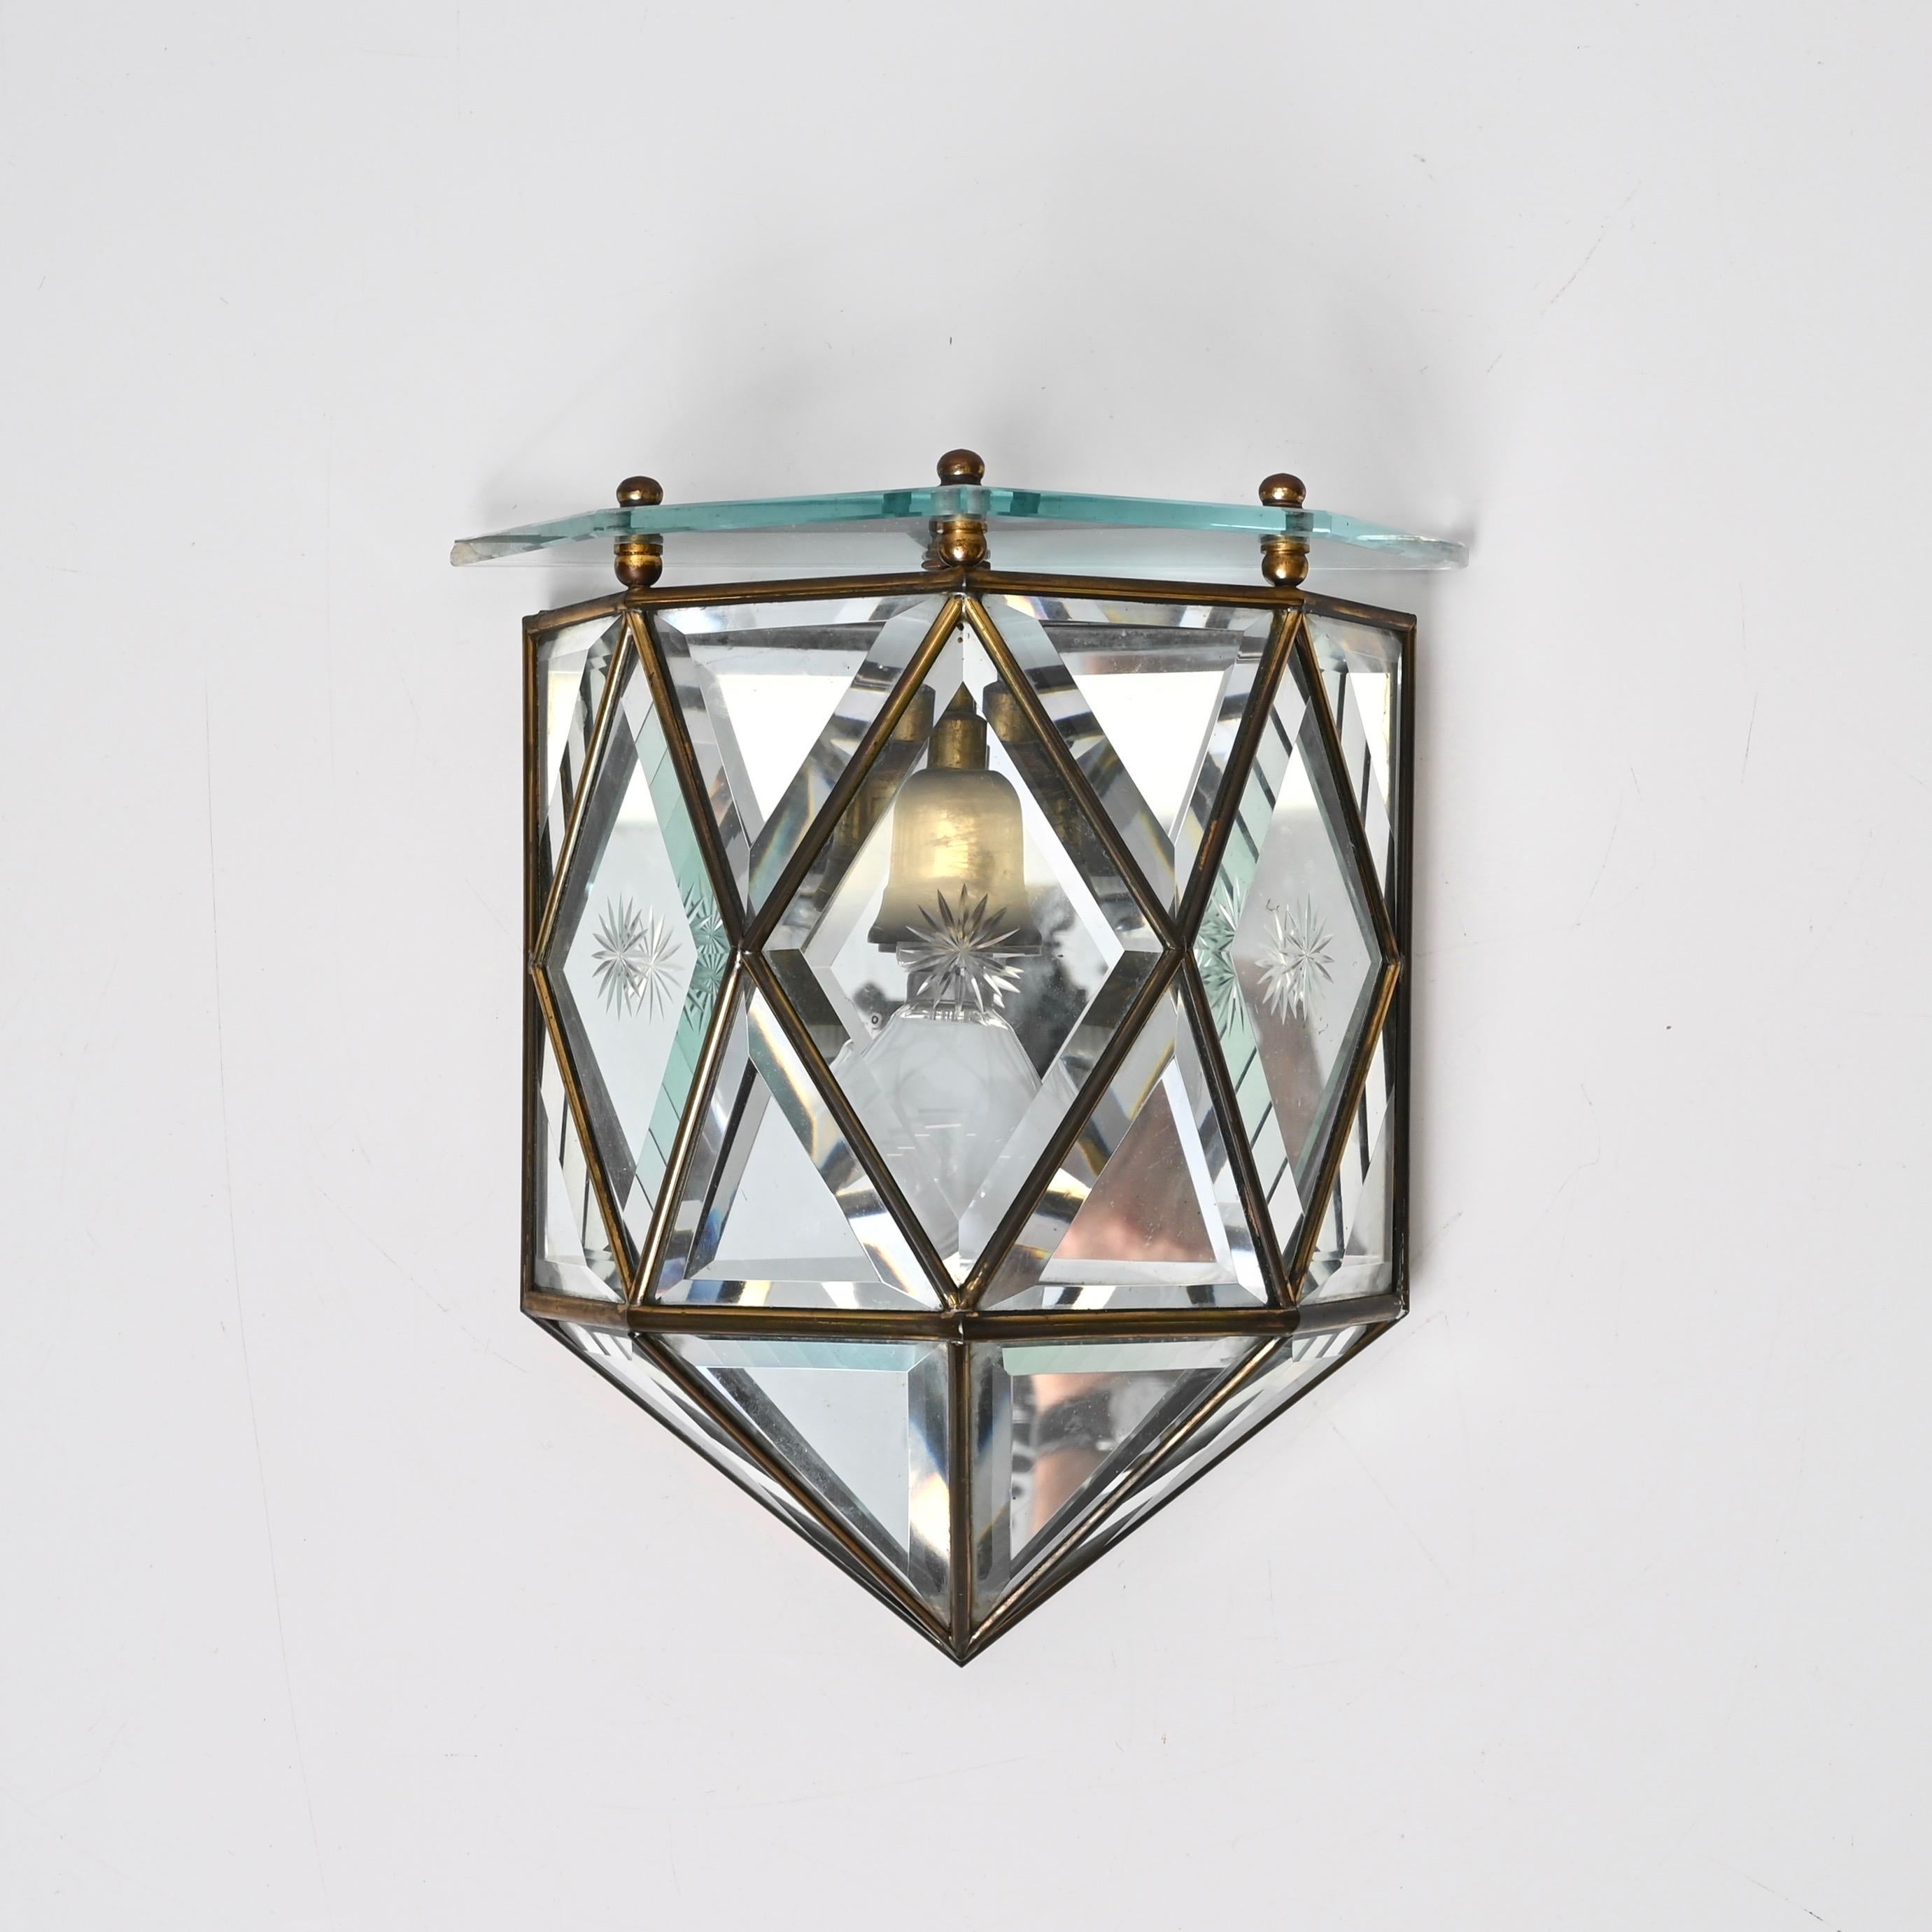 Fontana Arte Pair of Sconces in Beveled Glass, Brass and Mirror, Italy, 1940s For Sale 6